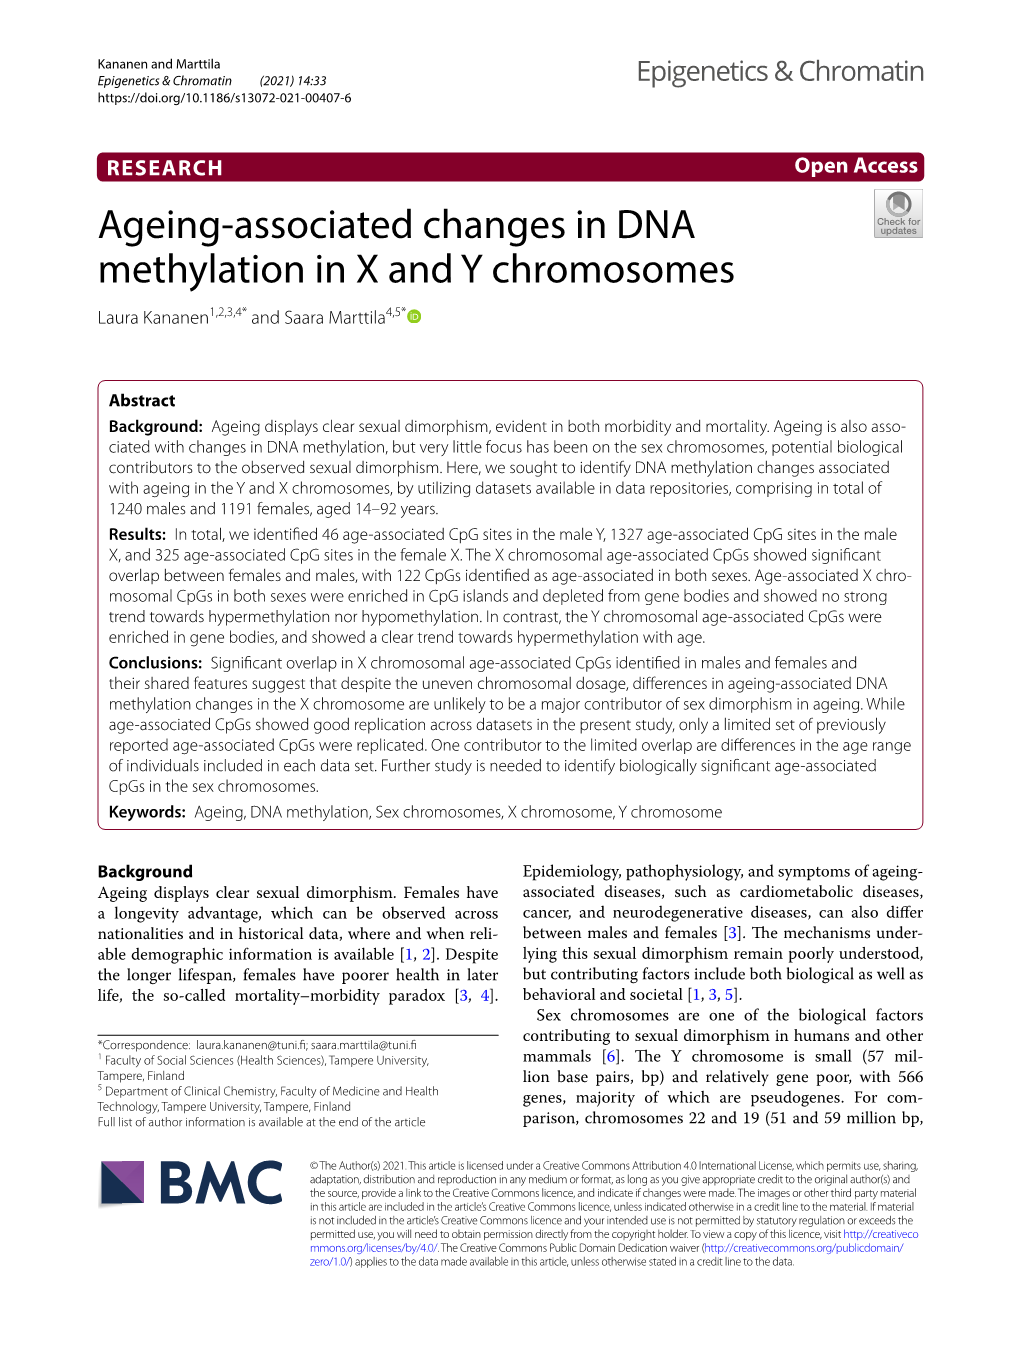 Ageing-Associated Changes in DNA Methylation in X and Y Chromosomes